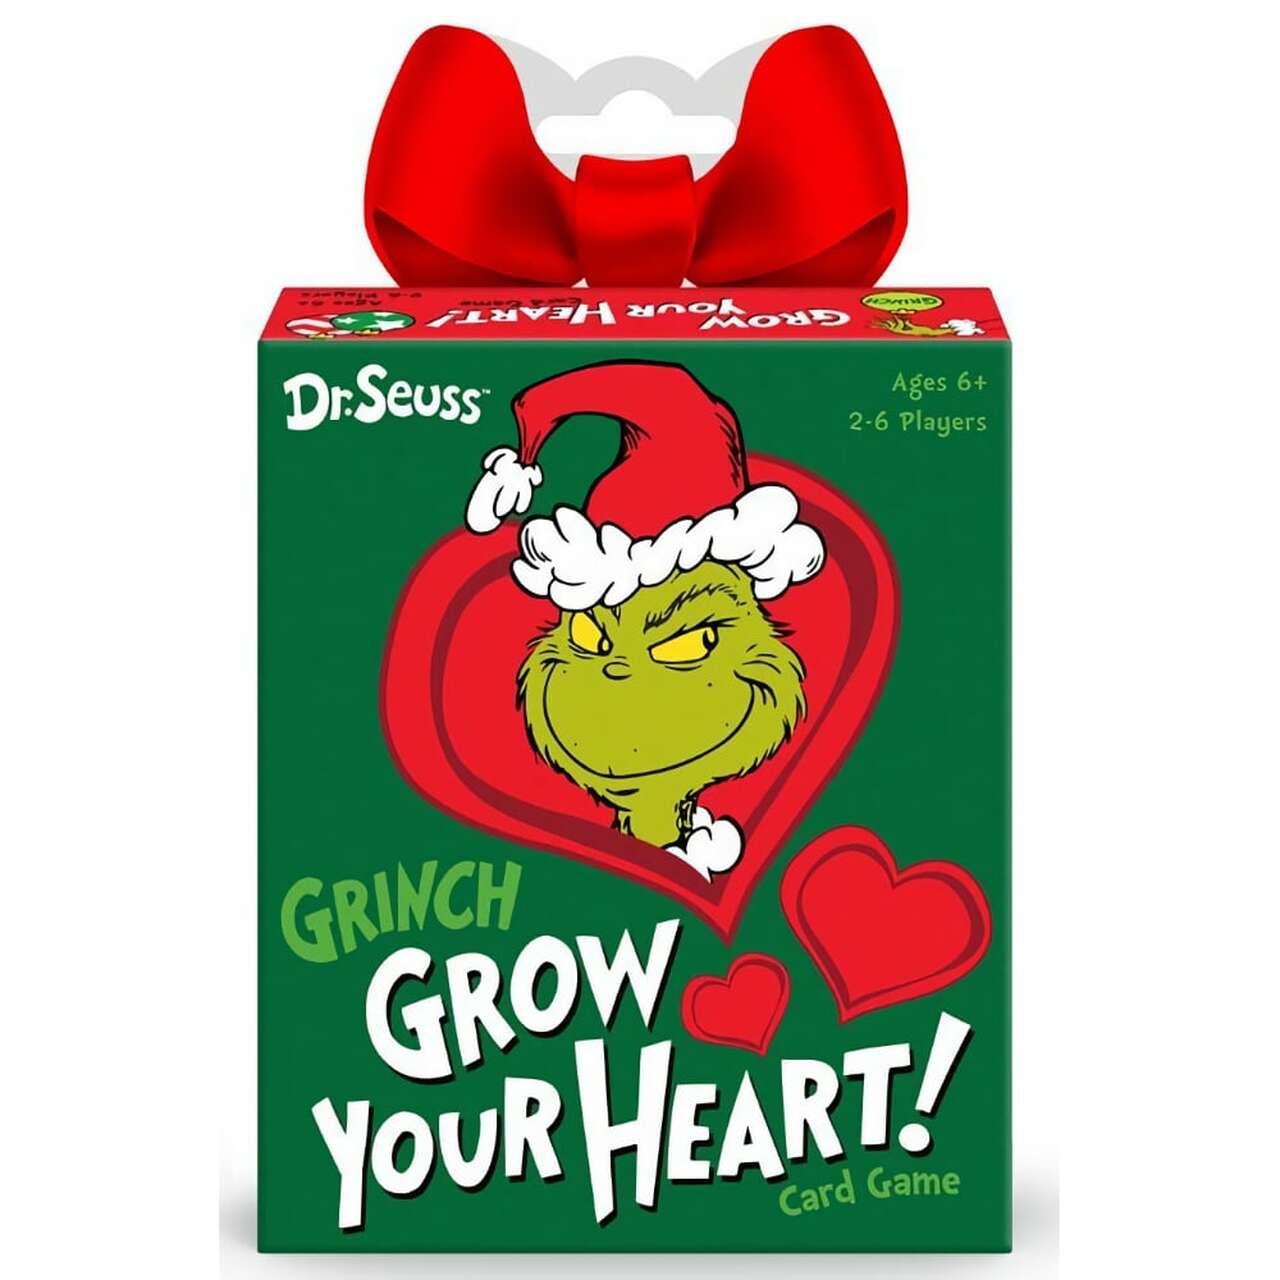 Grinch Grow Your Heart Game